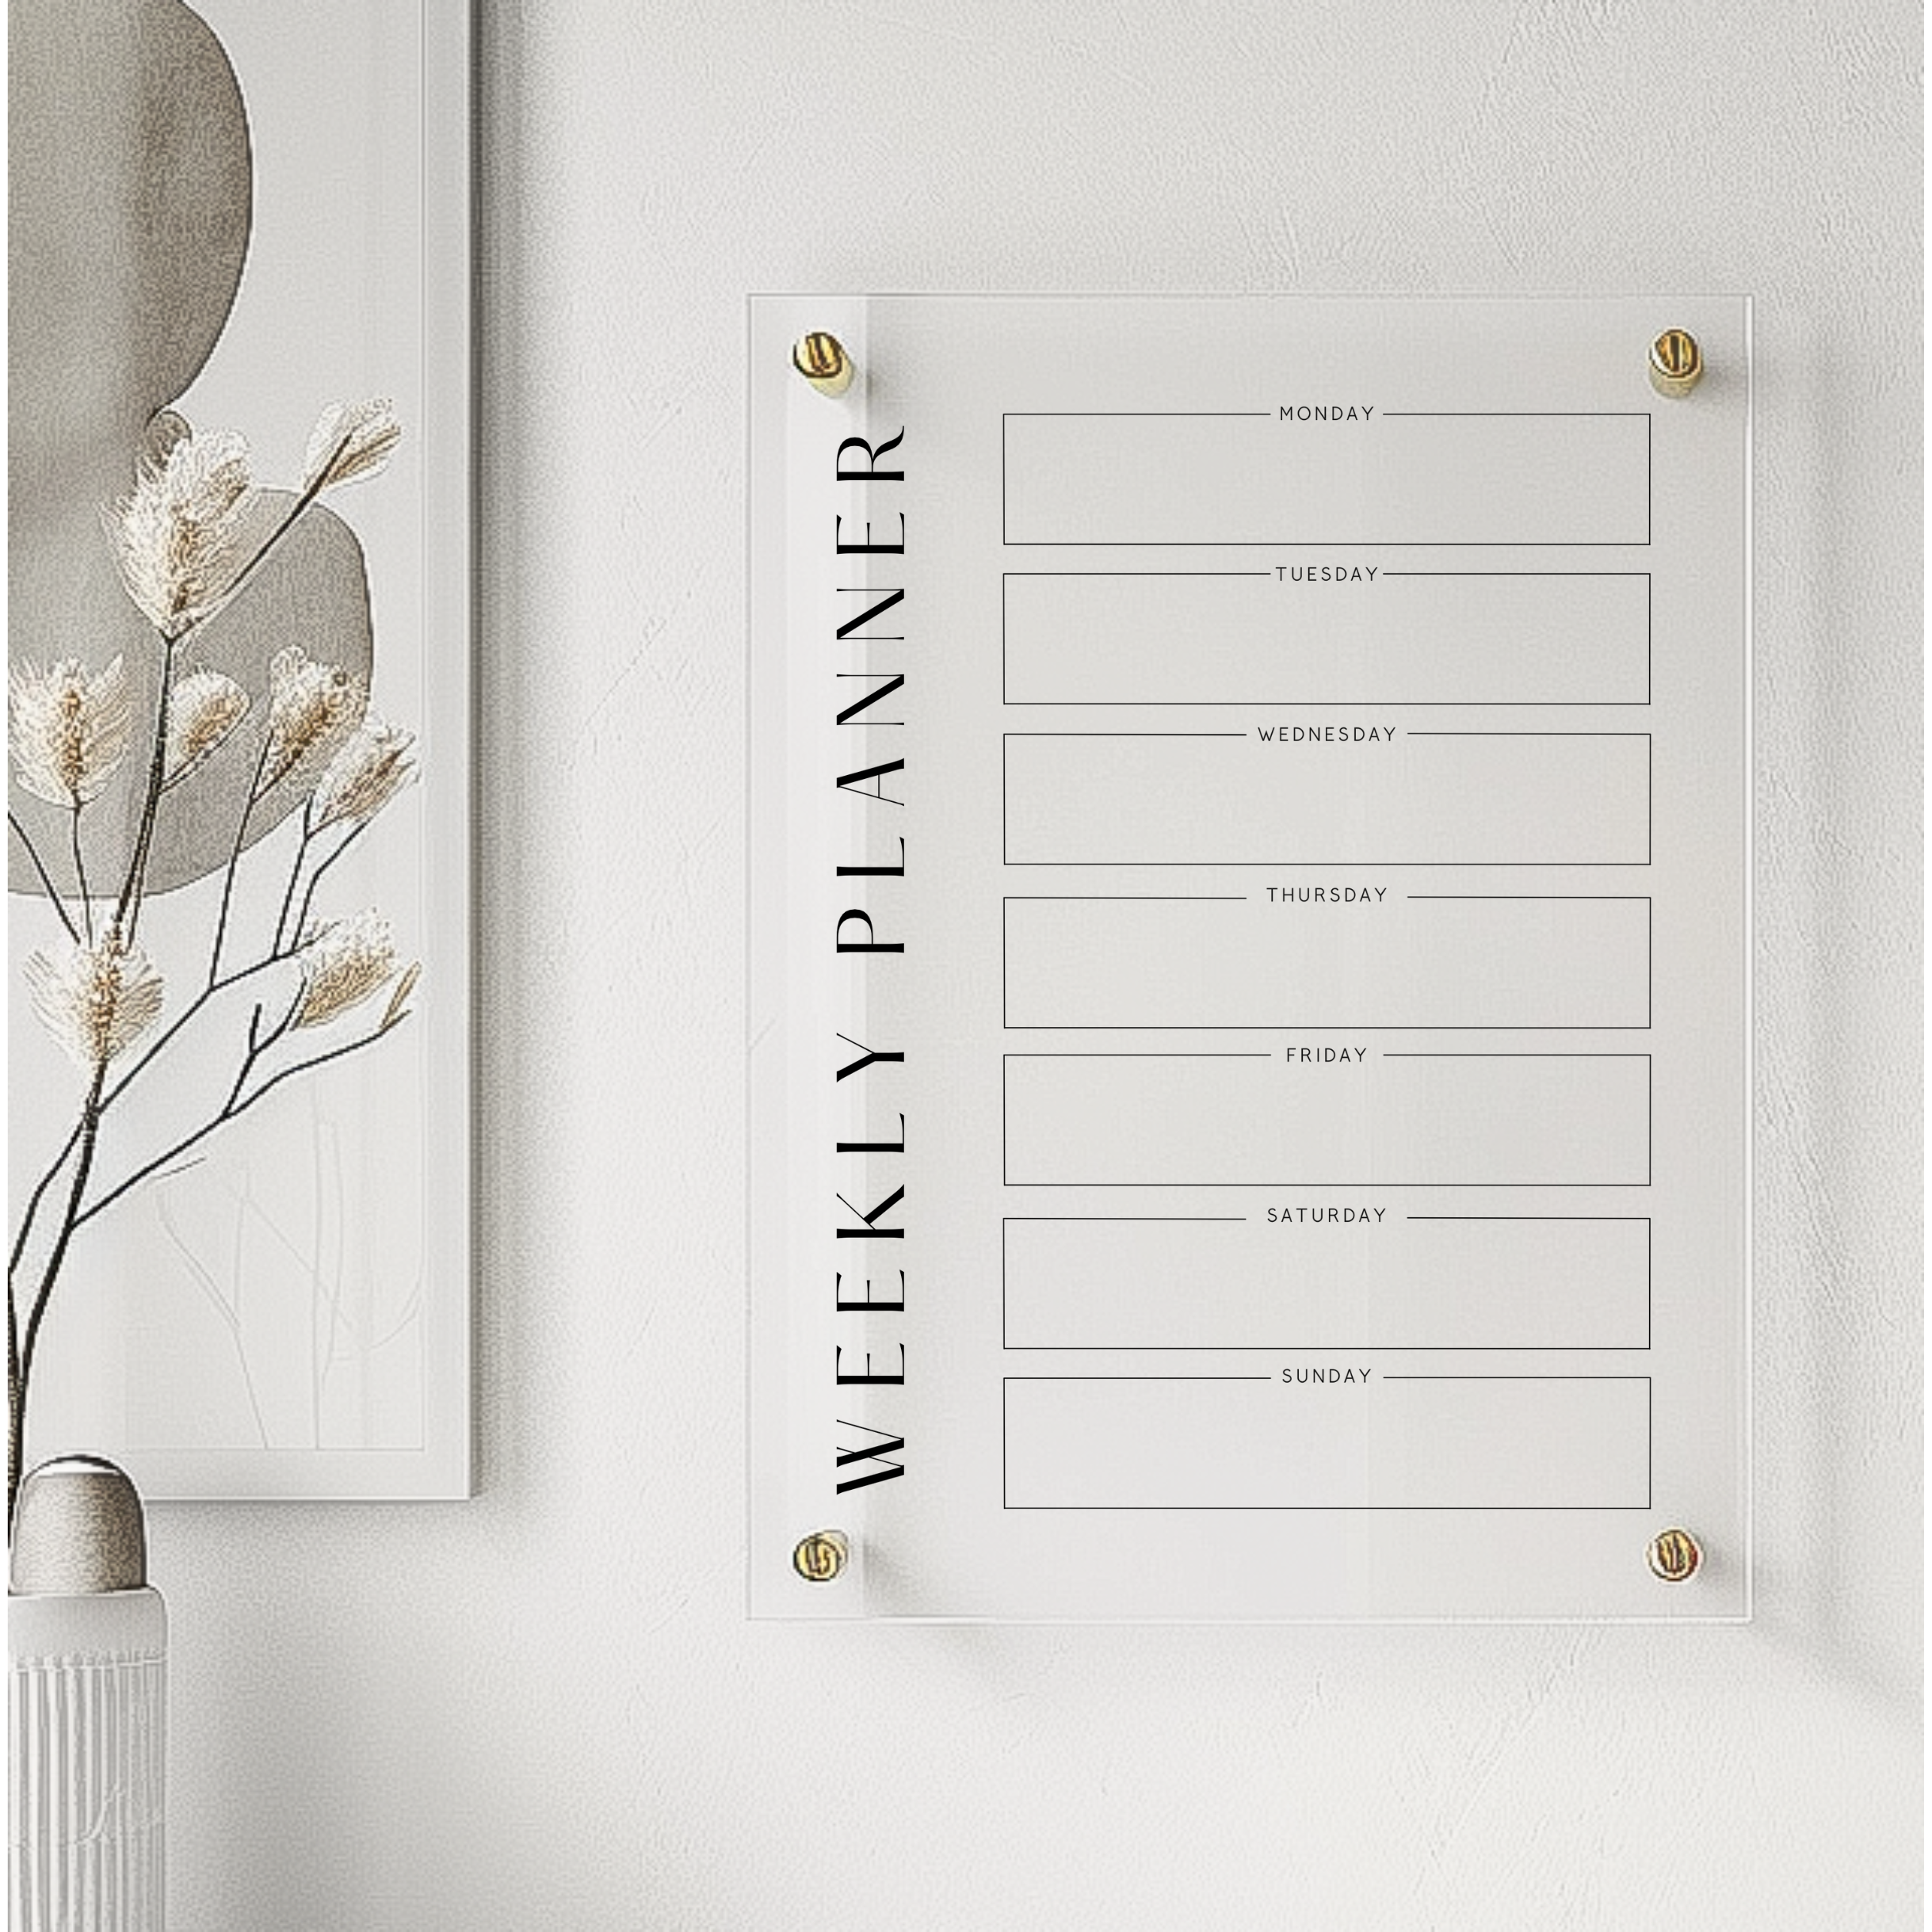 Custom A4/A3 Clear Acrylic Wall Planner with Modern Design and Various Fixture Options